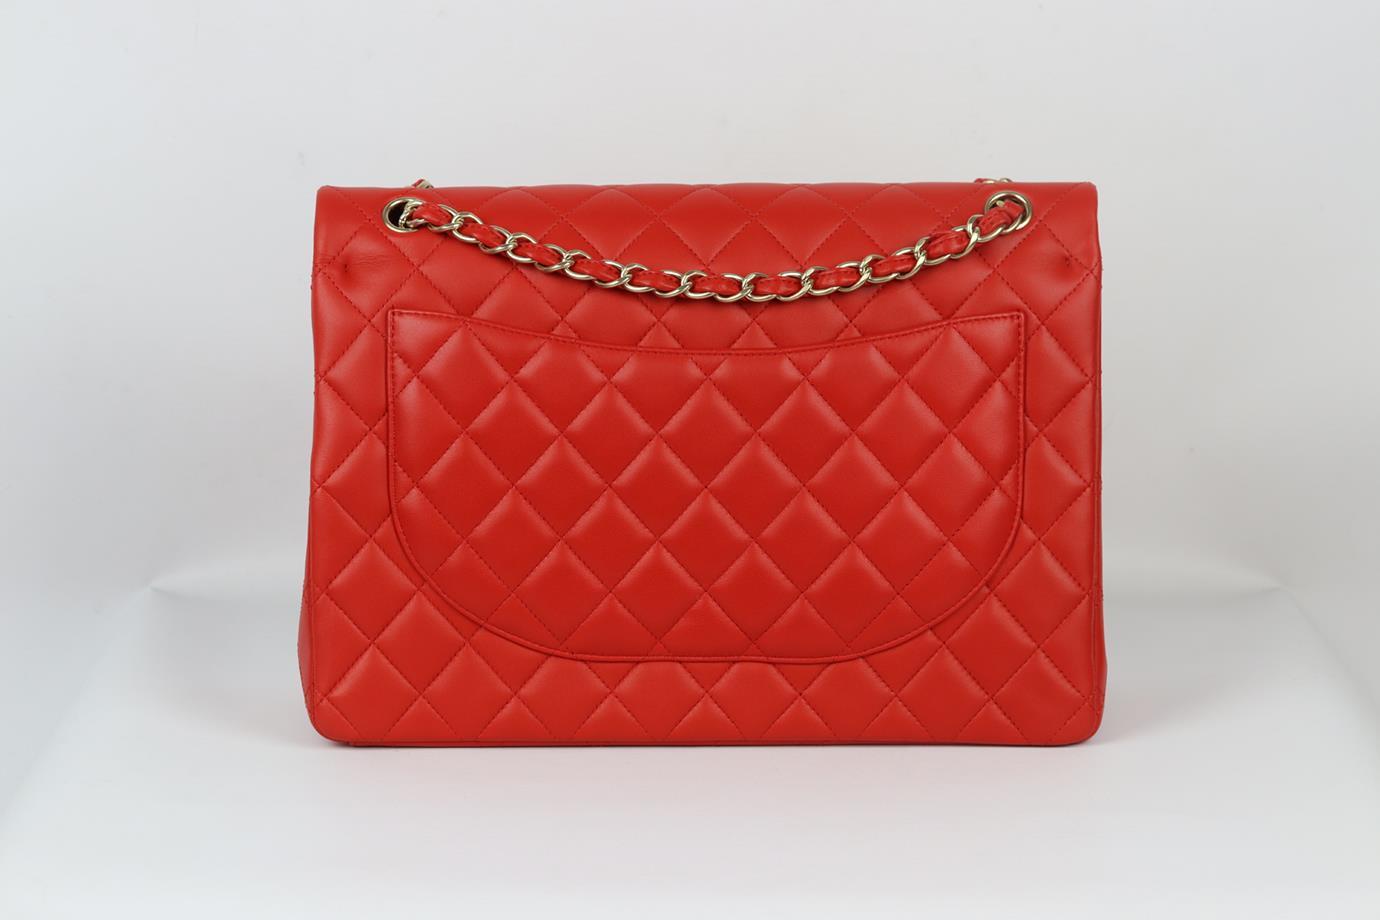 Women's Chanel 2012 Maxi Classic Quilted Leather Double Flap Shoulder Bag